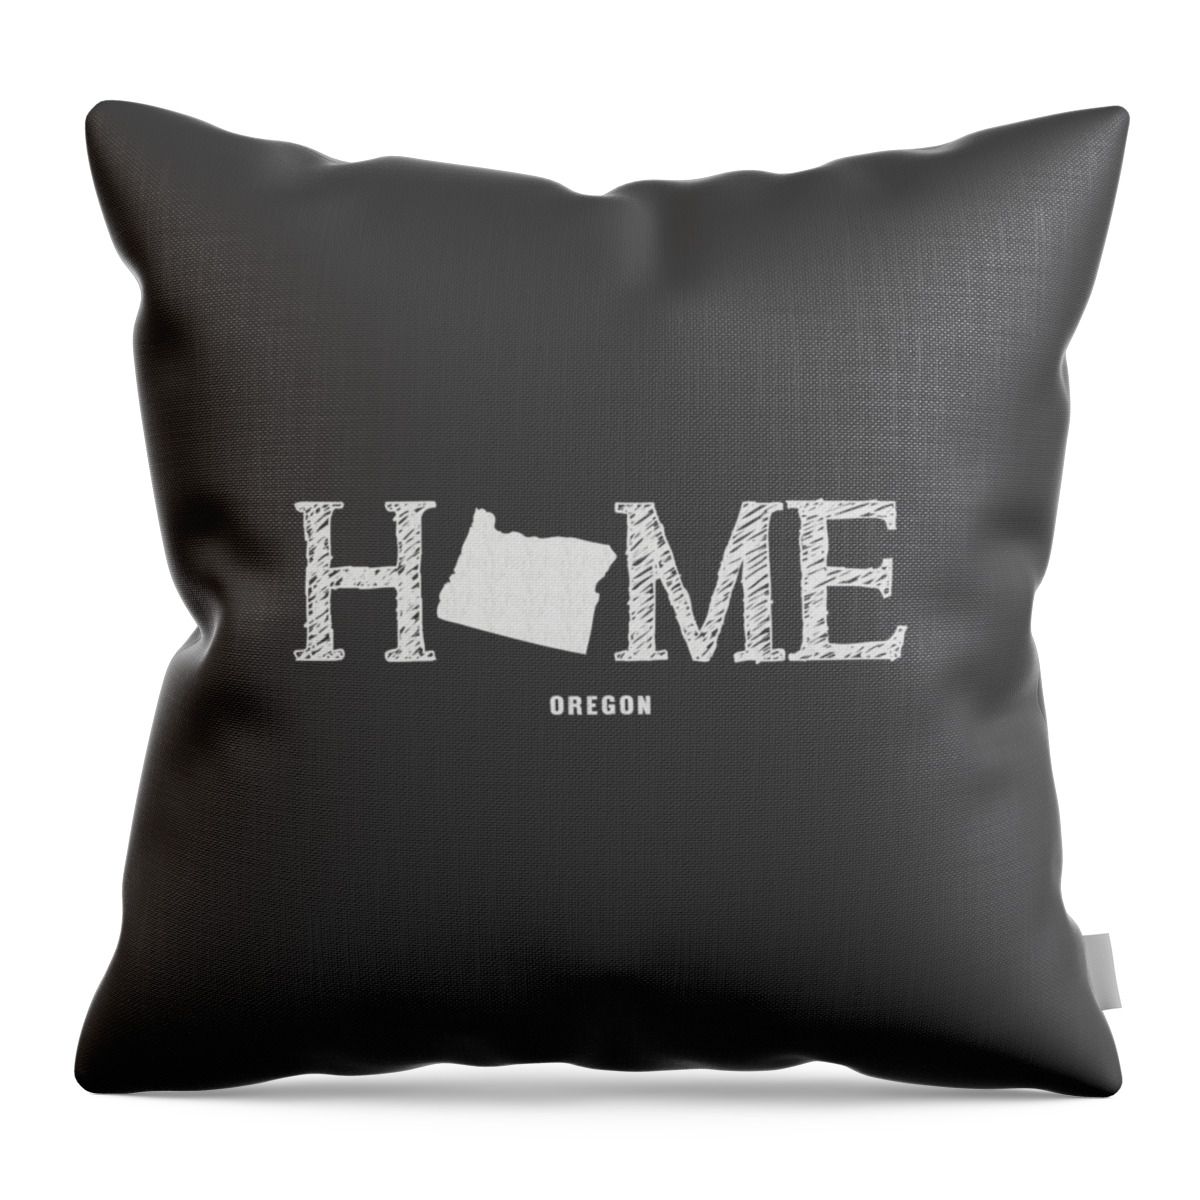 Oregon Throw Pillow featuring the mixed media OR Home by Nancy Ingersoll